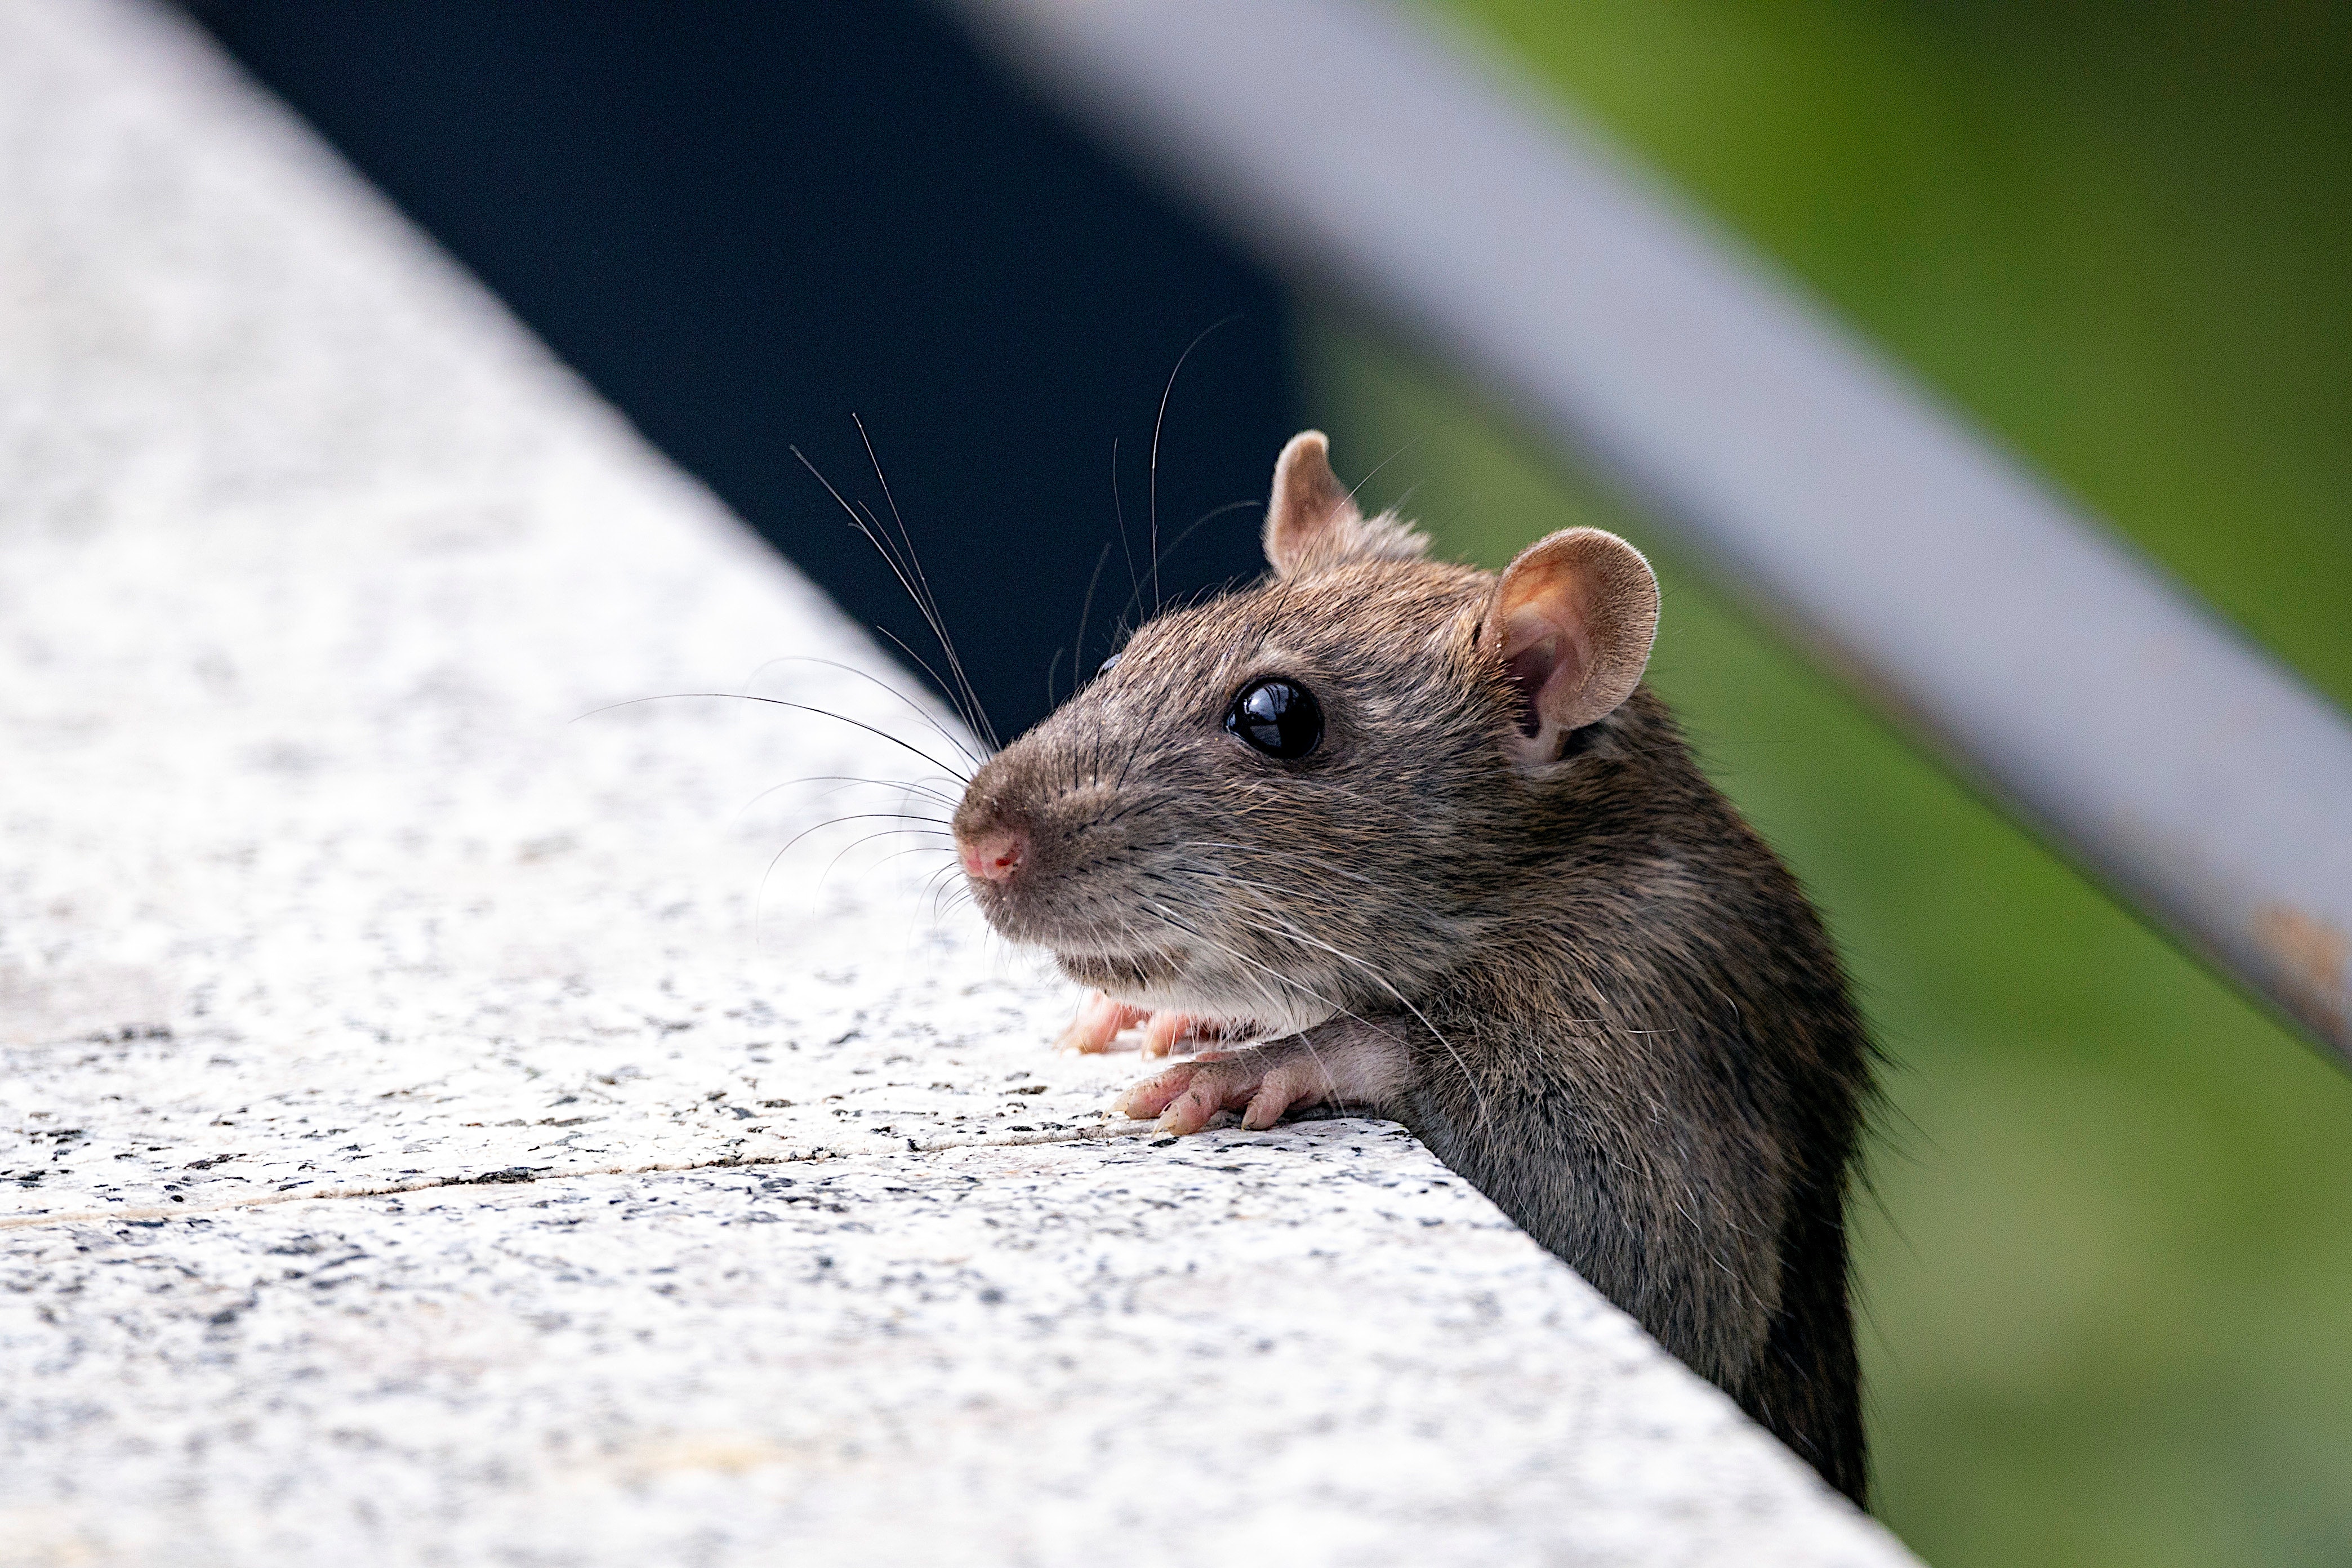 Blog - Why Mouse Traps Just Aren't Working In Your Houston Home